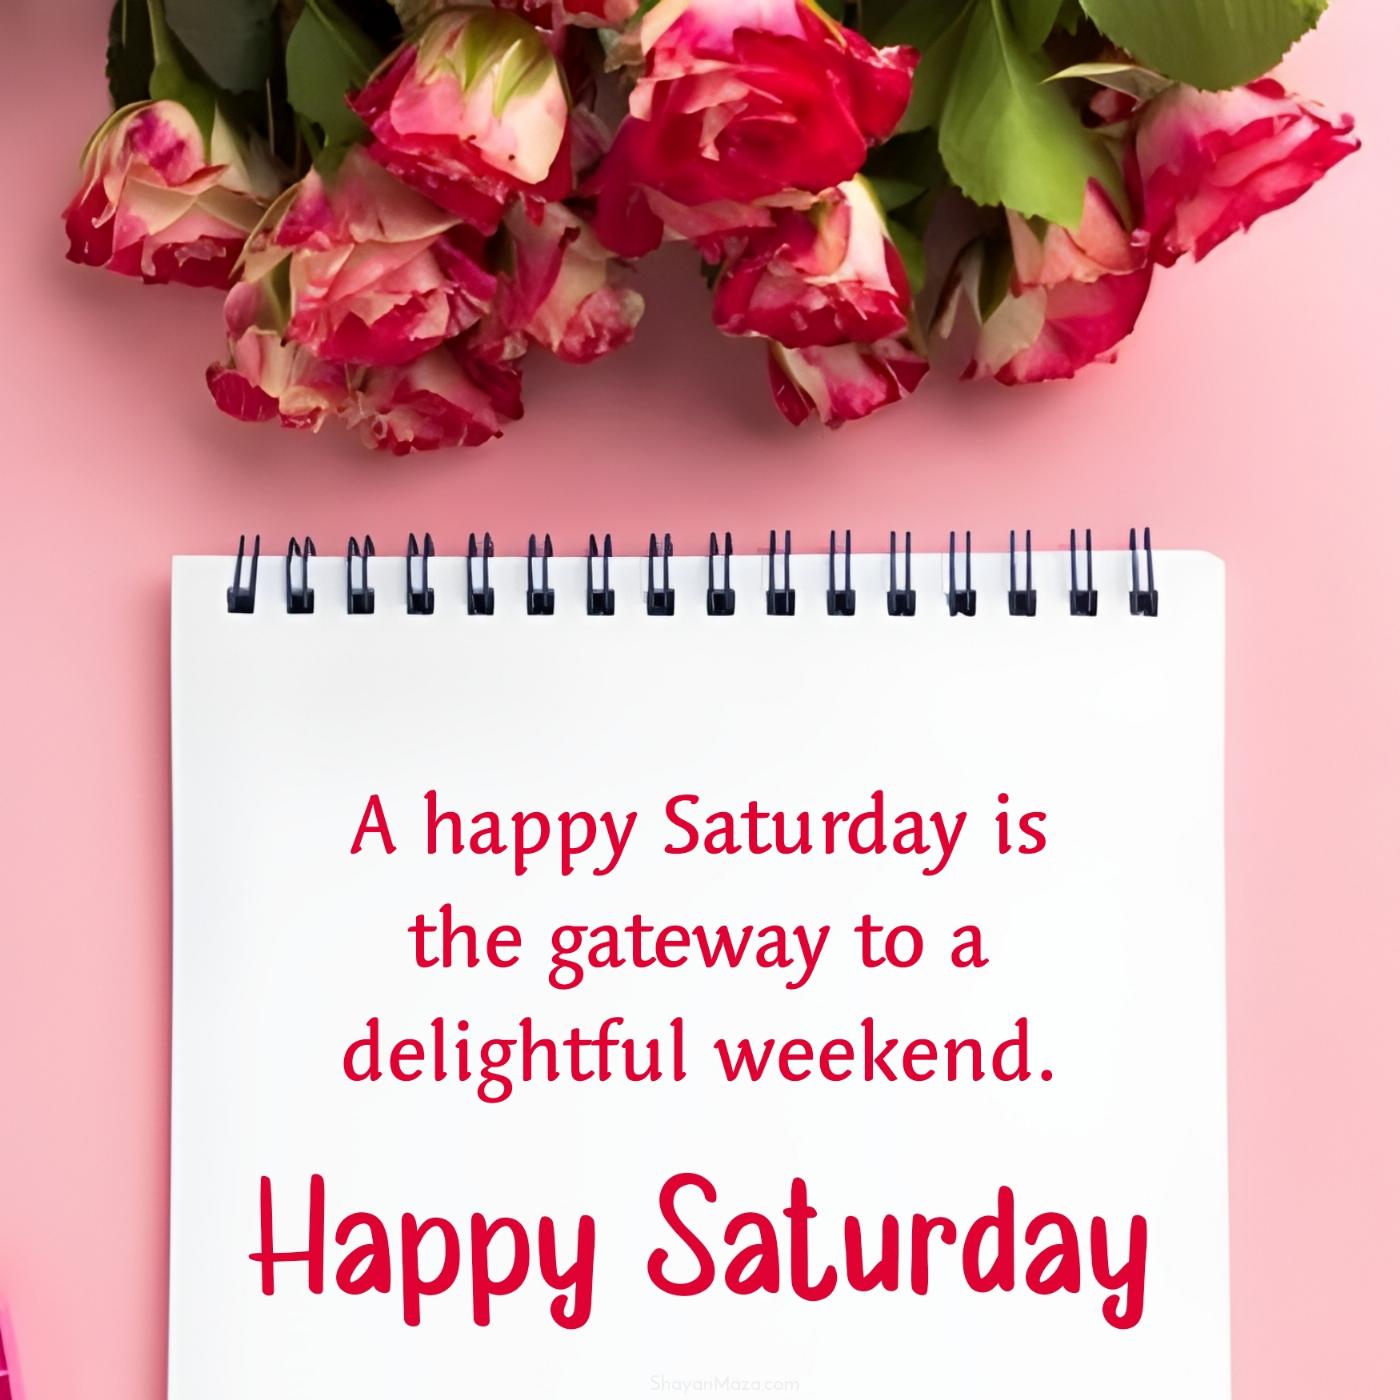 A happy Saturday is the gateway to a delightful weekend